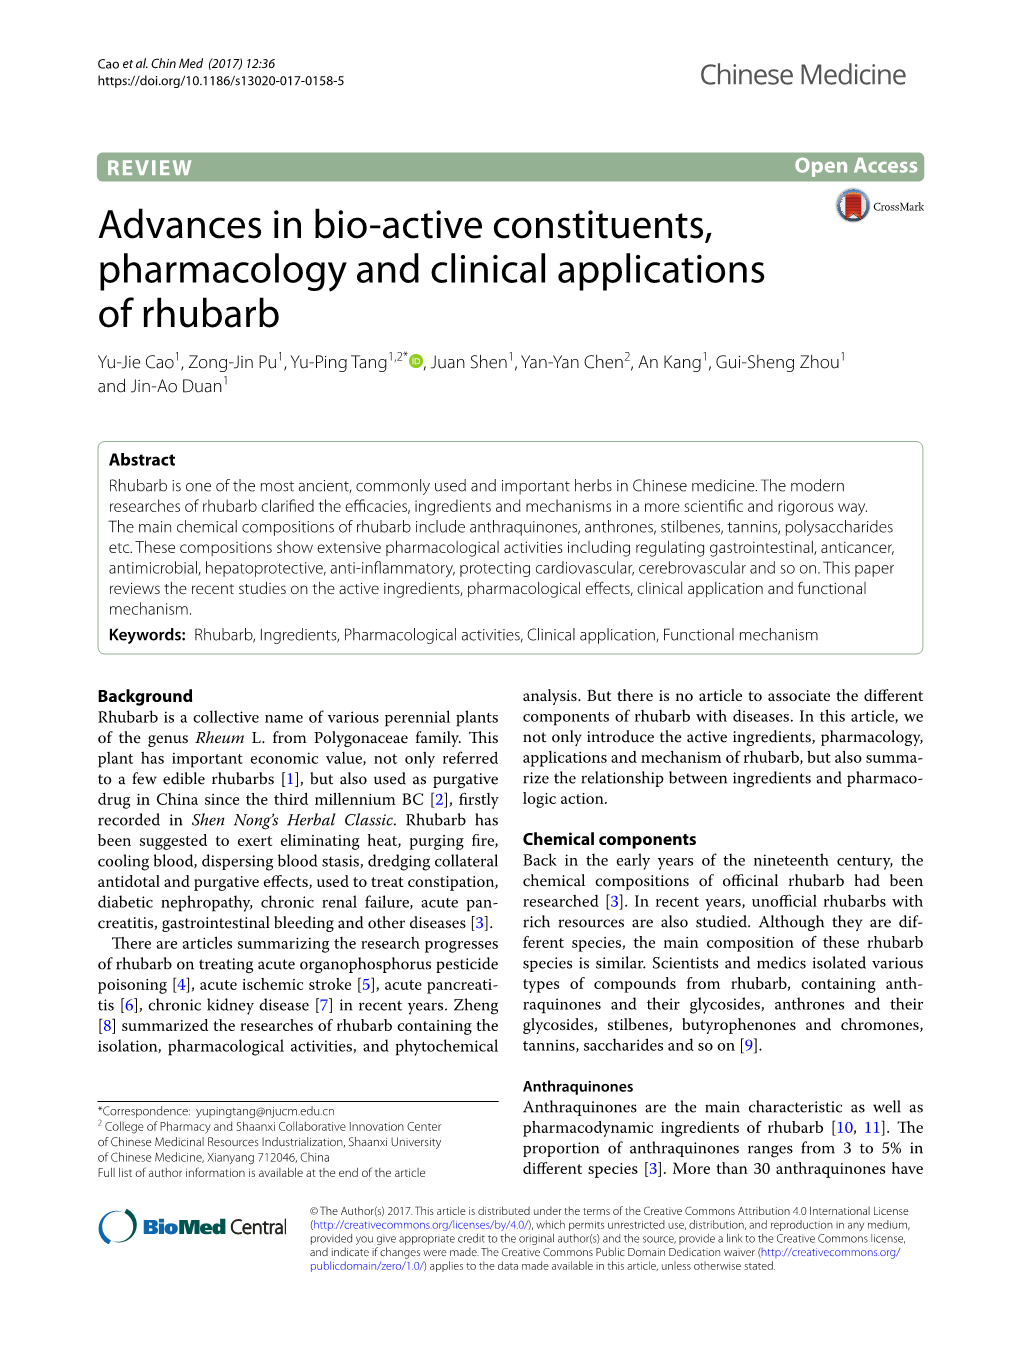 Advances in Bio-Active Constituents, Pharmacology and Clinical